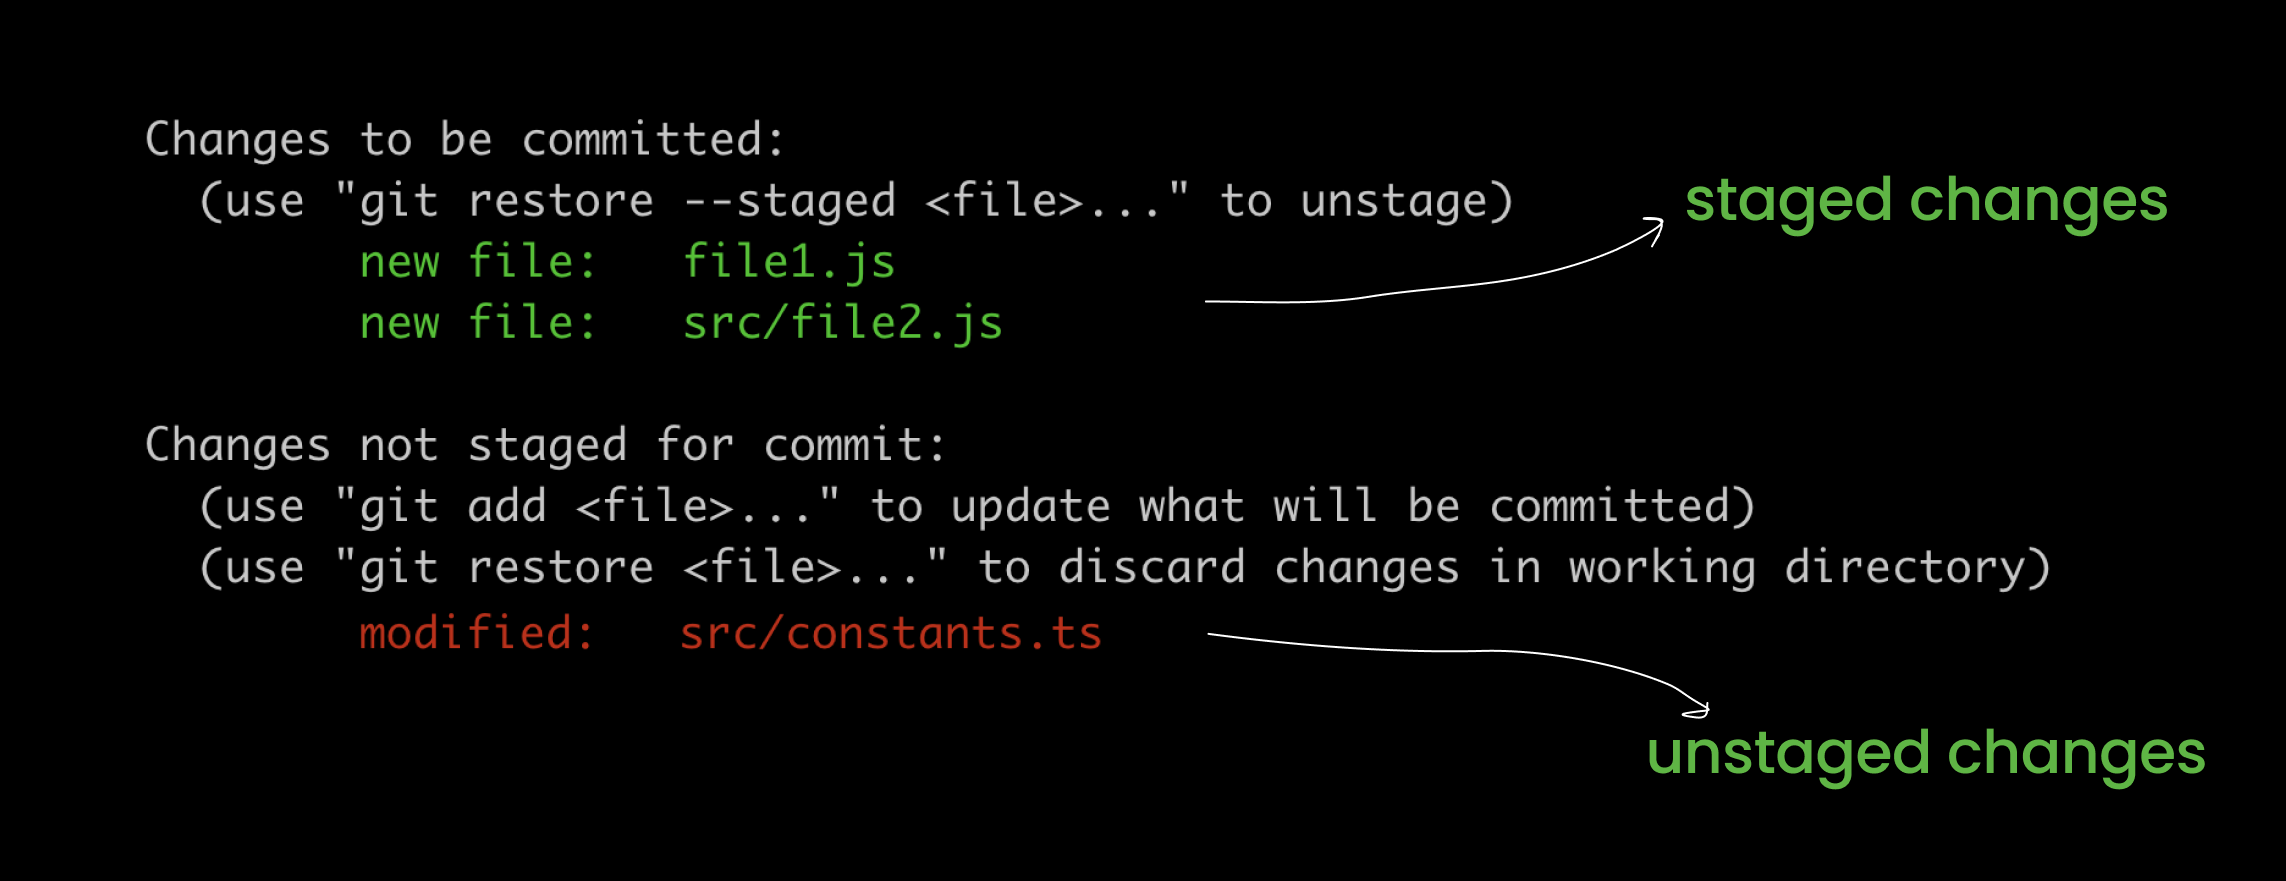 Staged changes result in git